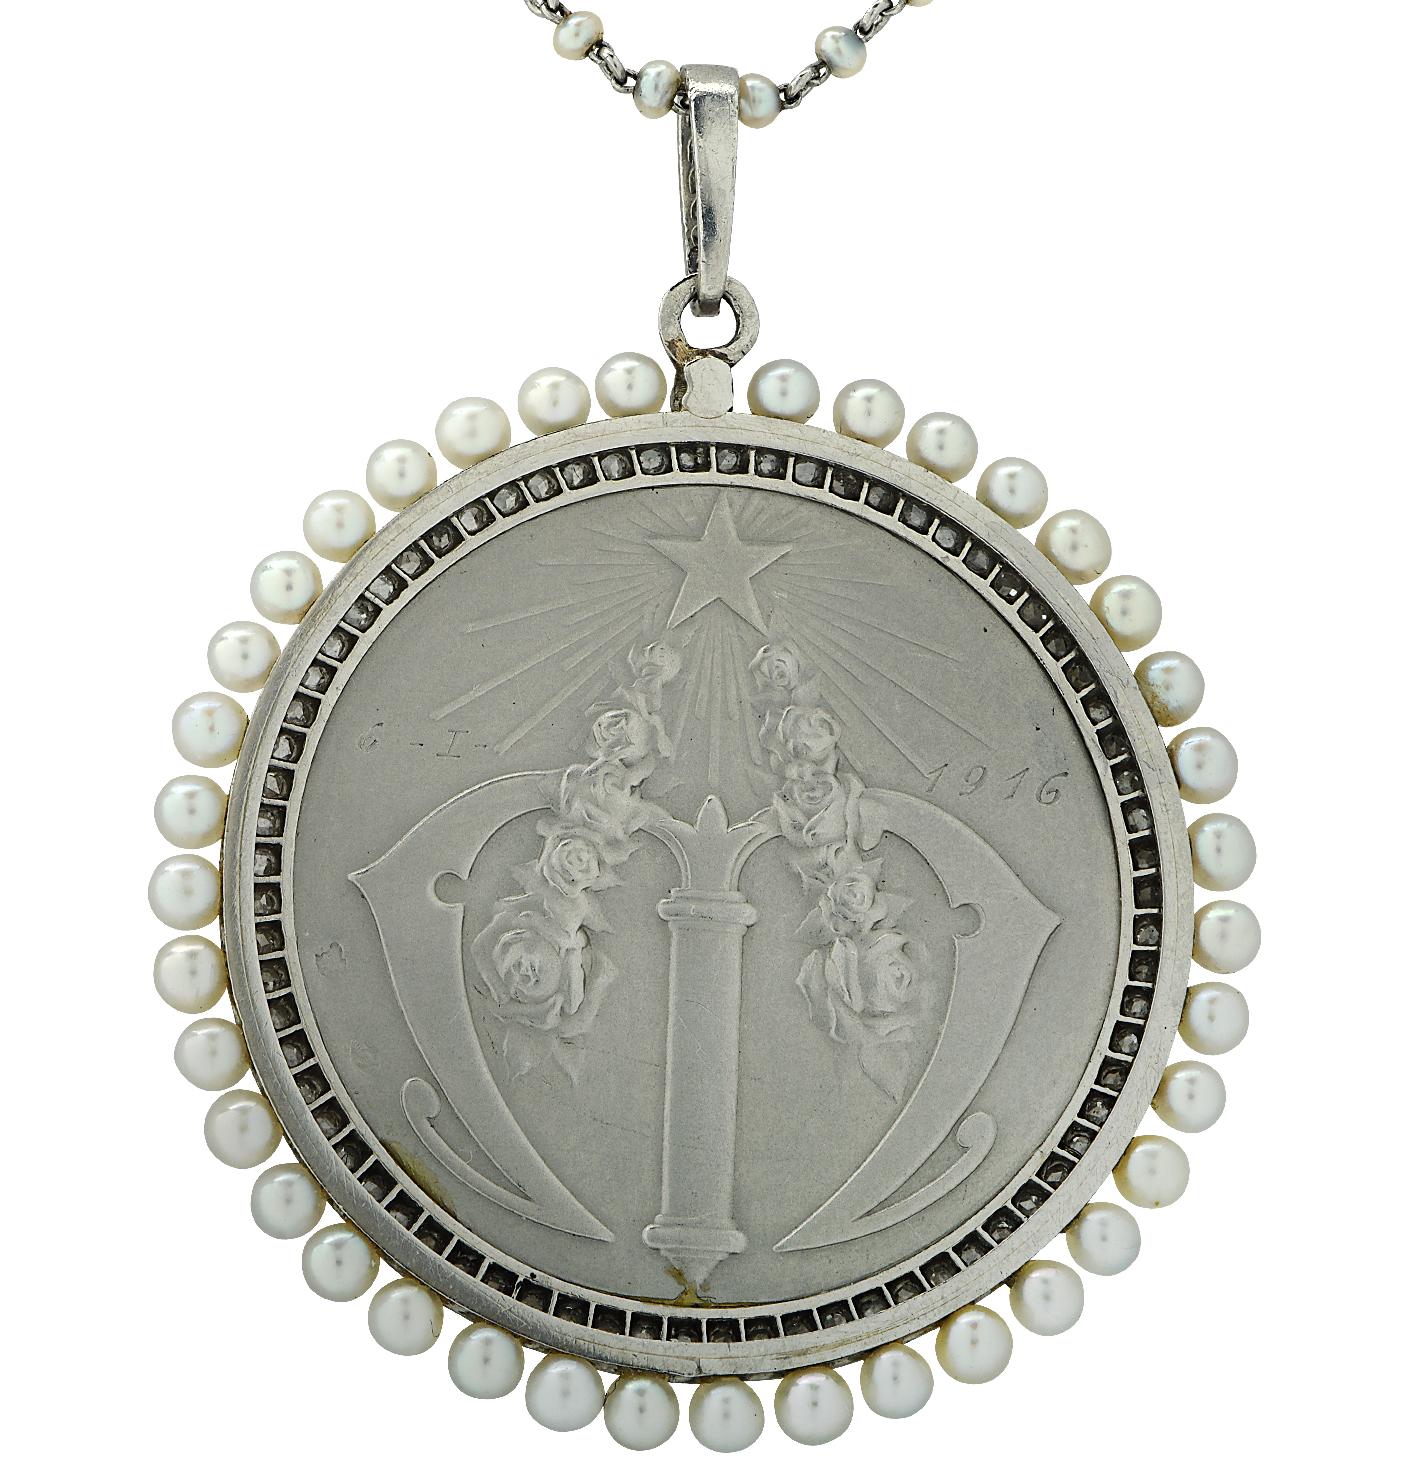 Beautiful Edwardian Art Nouveau Frederic Vernon Seed Pearl Pendant, circa 1900's, crafted in platinum, featuring an image of a Virgin carved in mother of pearl, detailed with seed pearls and 80 rose cut diamonds. The back of the pendant is engraved